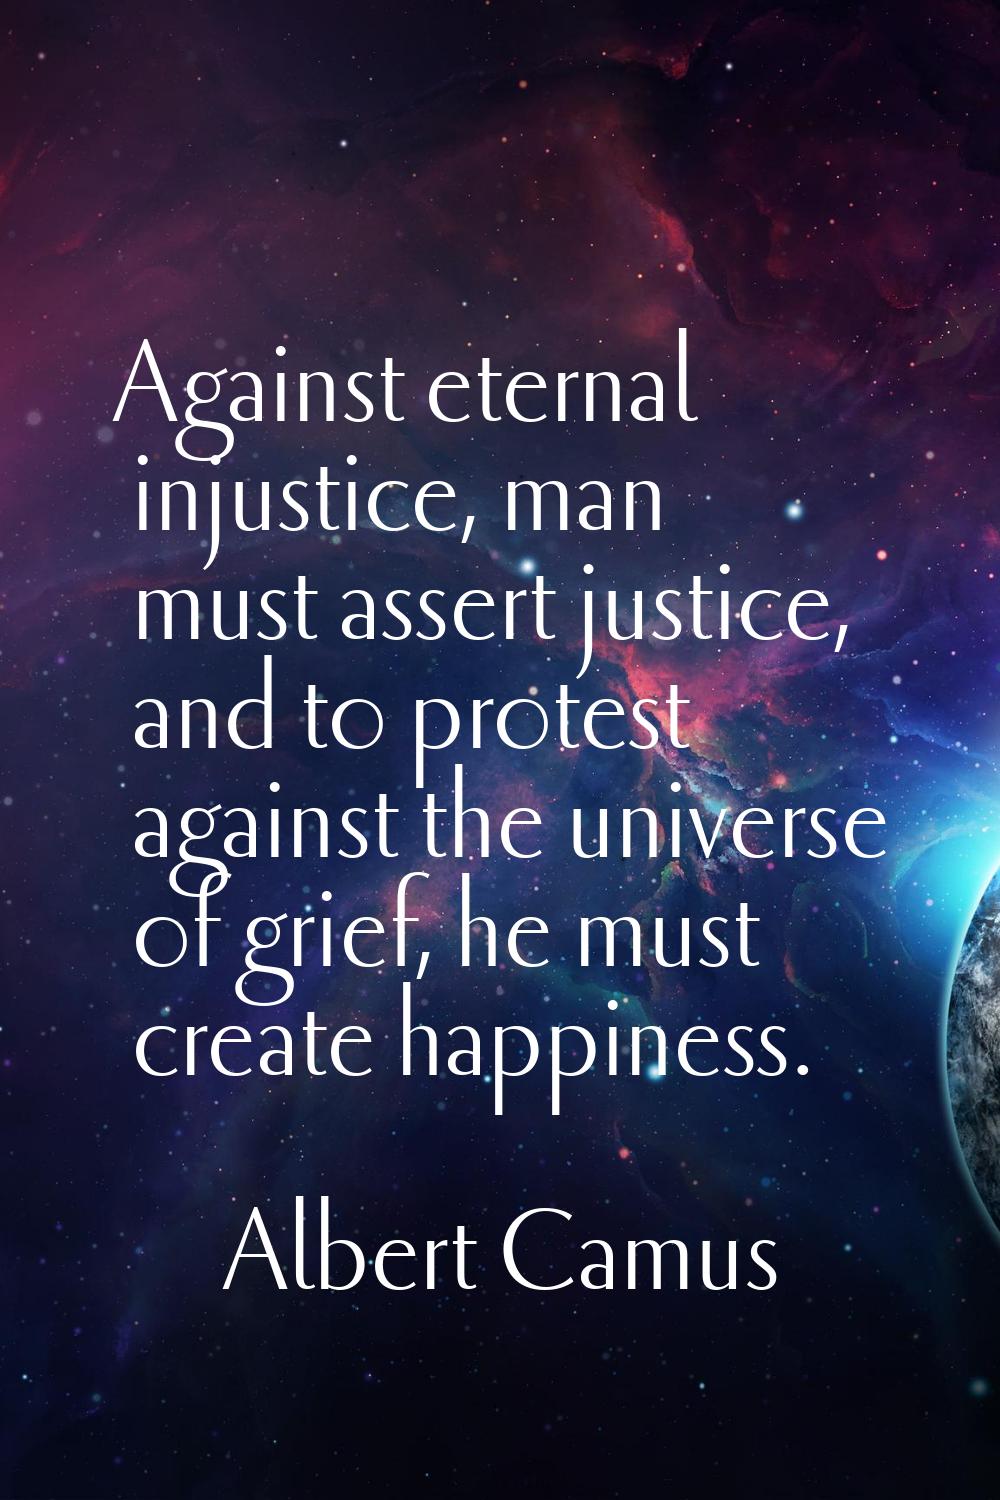 Against eternal injustice, man must assert justice, and to protest against the universe of grief, h